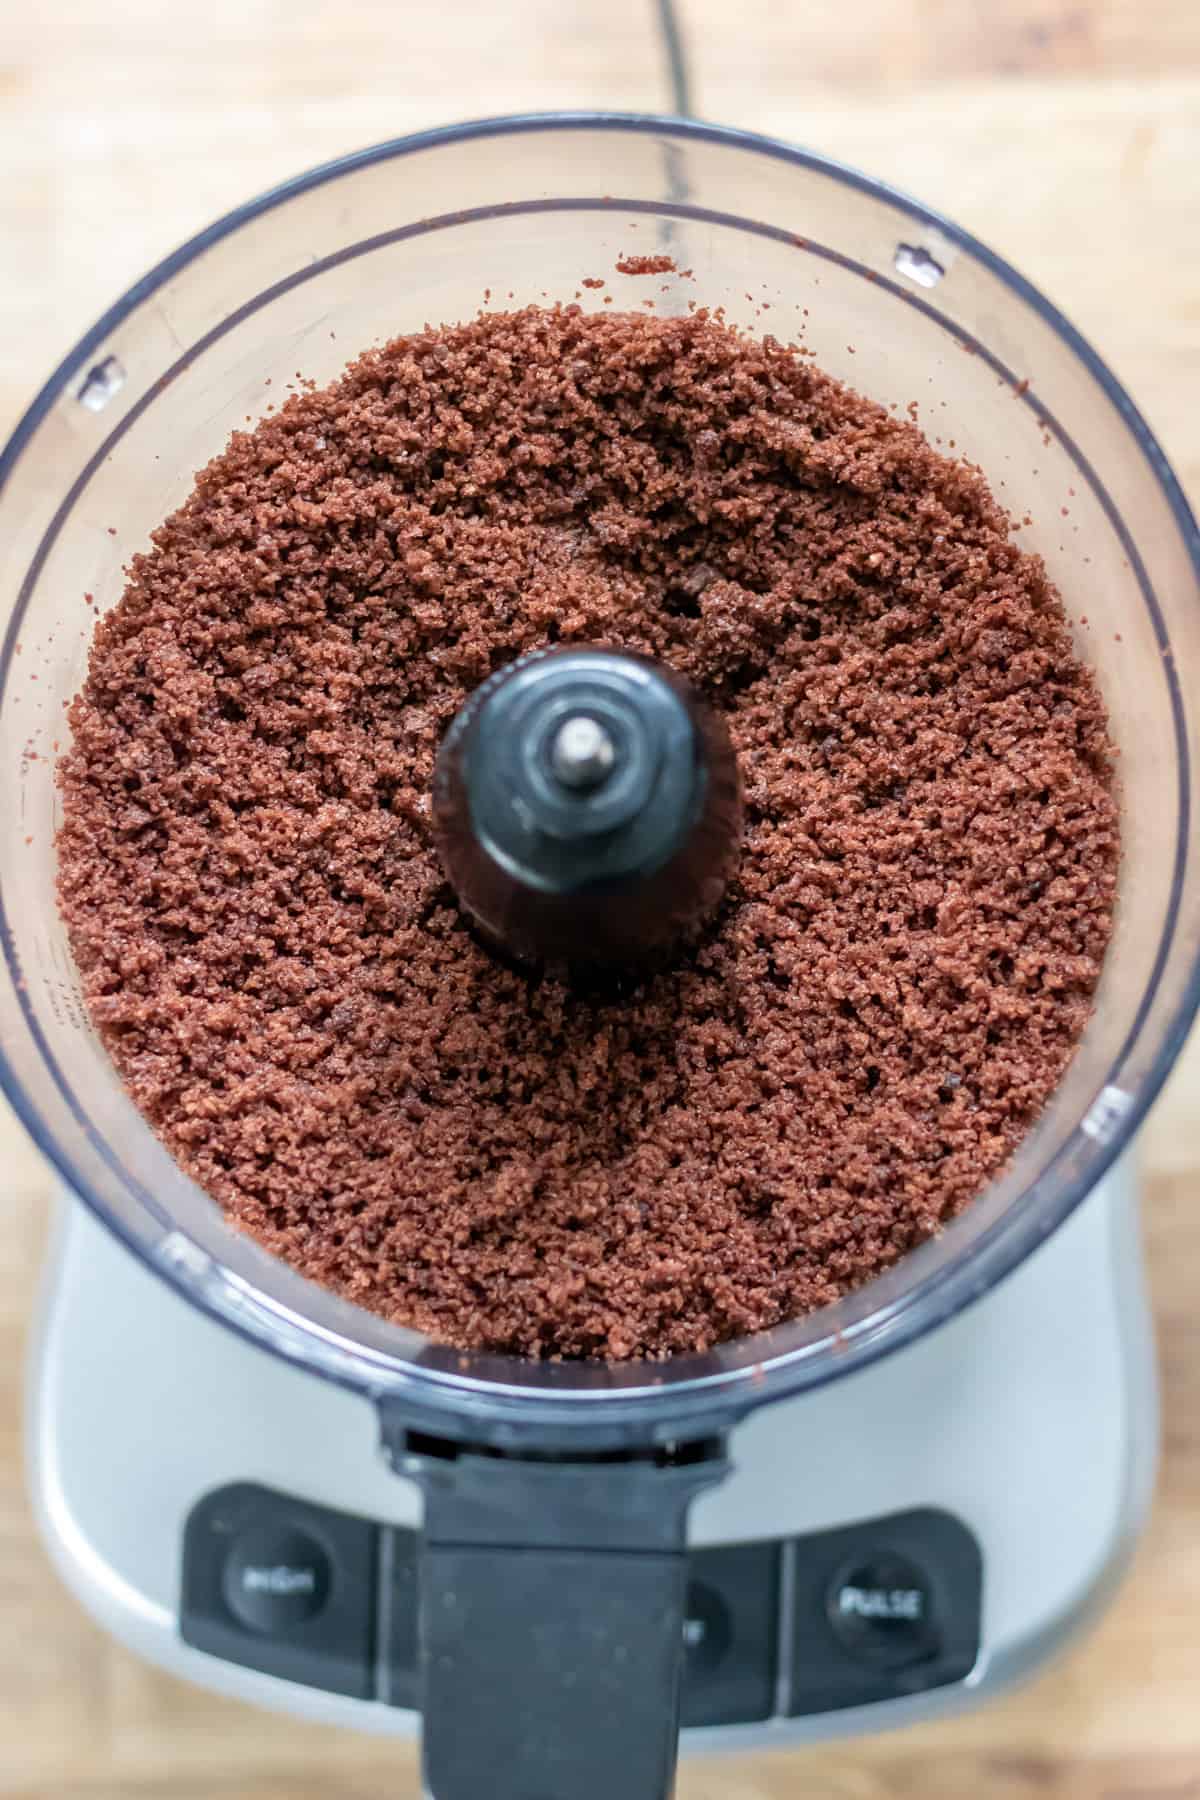 Cake mixed into crumbs in a food processor.